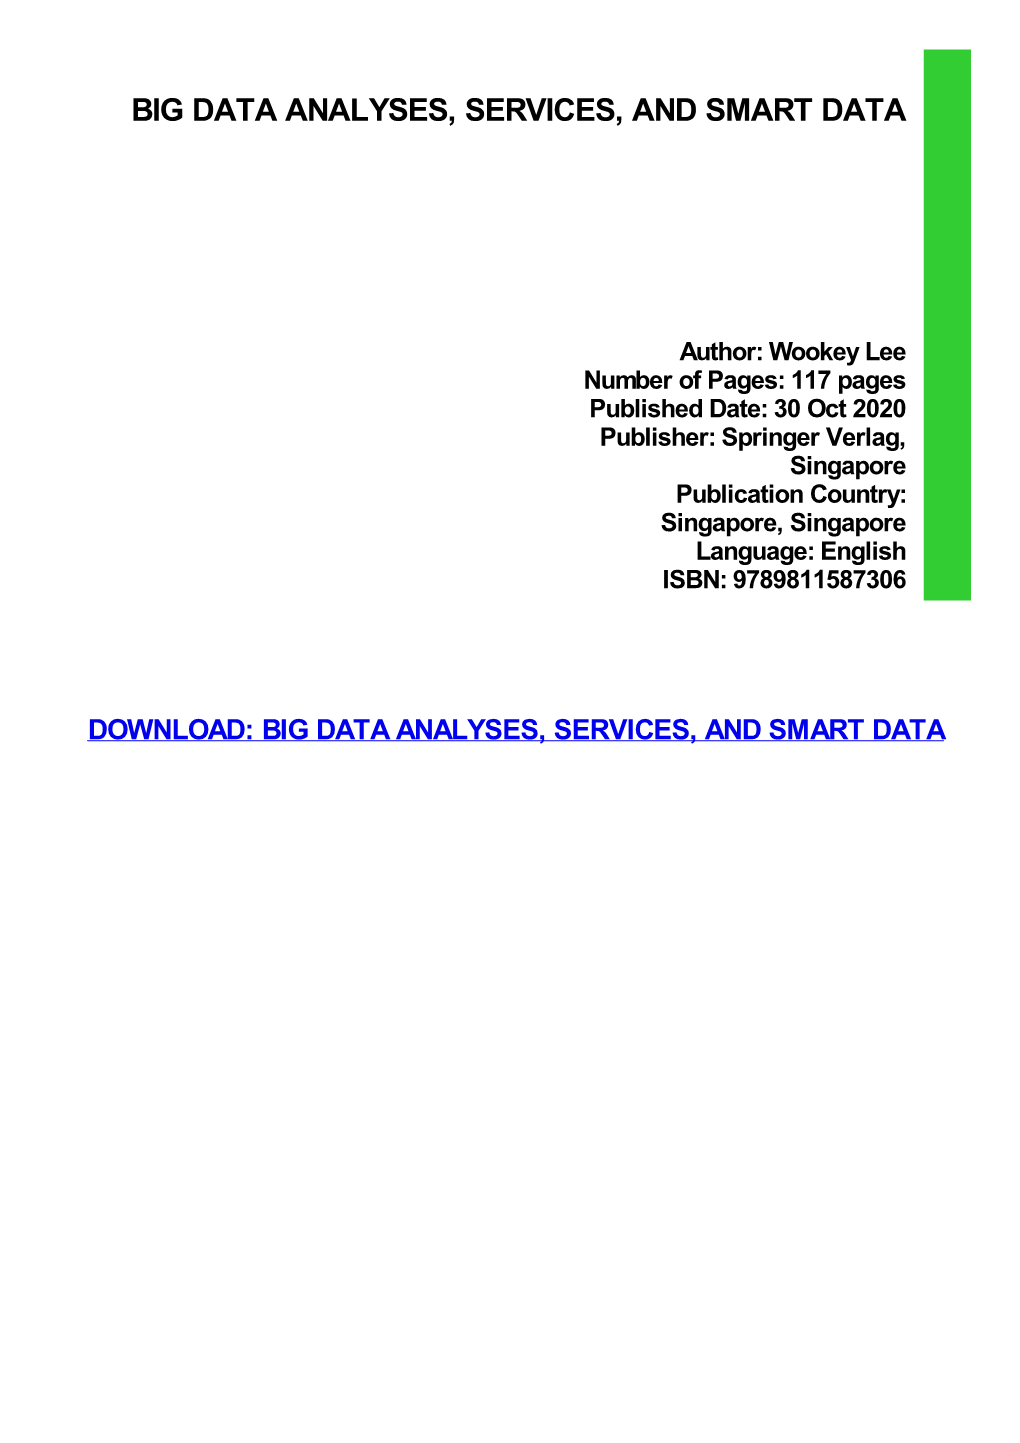 Big Data Analyses, Services, and Smart Data Ebook